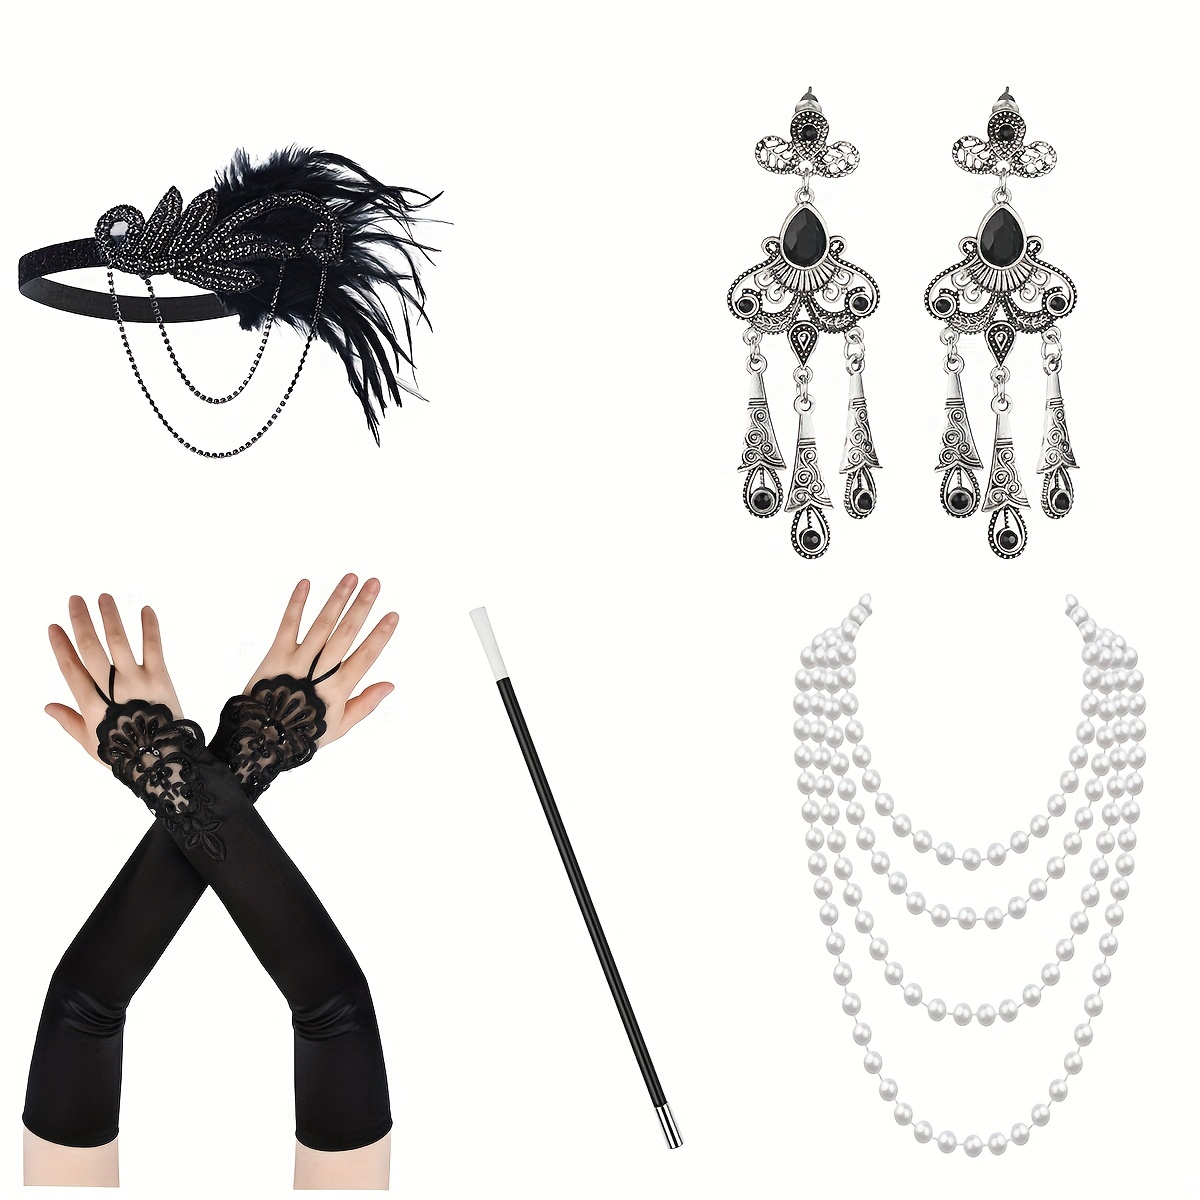 Siifert 4 Pcs 1920s Accessories Set Flapper Costume Pearl Jewelry Set  Include Beaded Sequin Clutch Evening Bag with Chain Pearl Necklace Bracelet